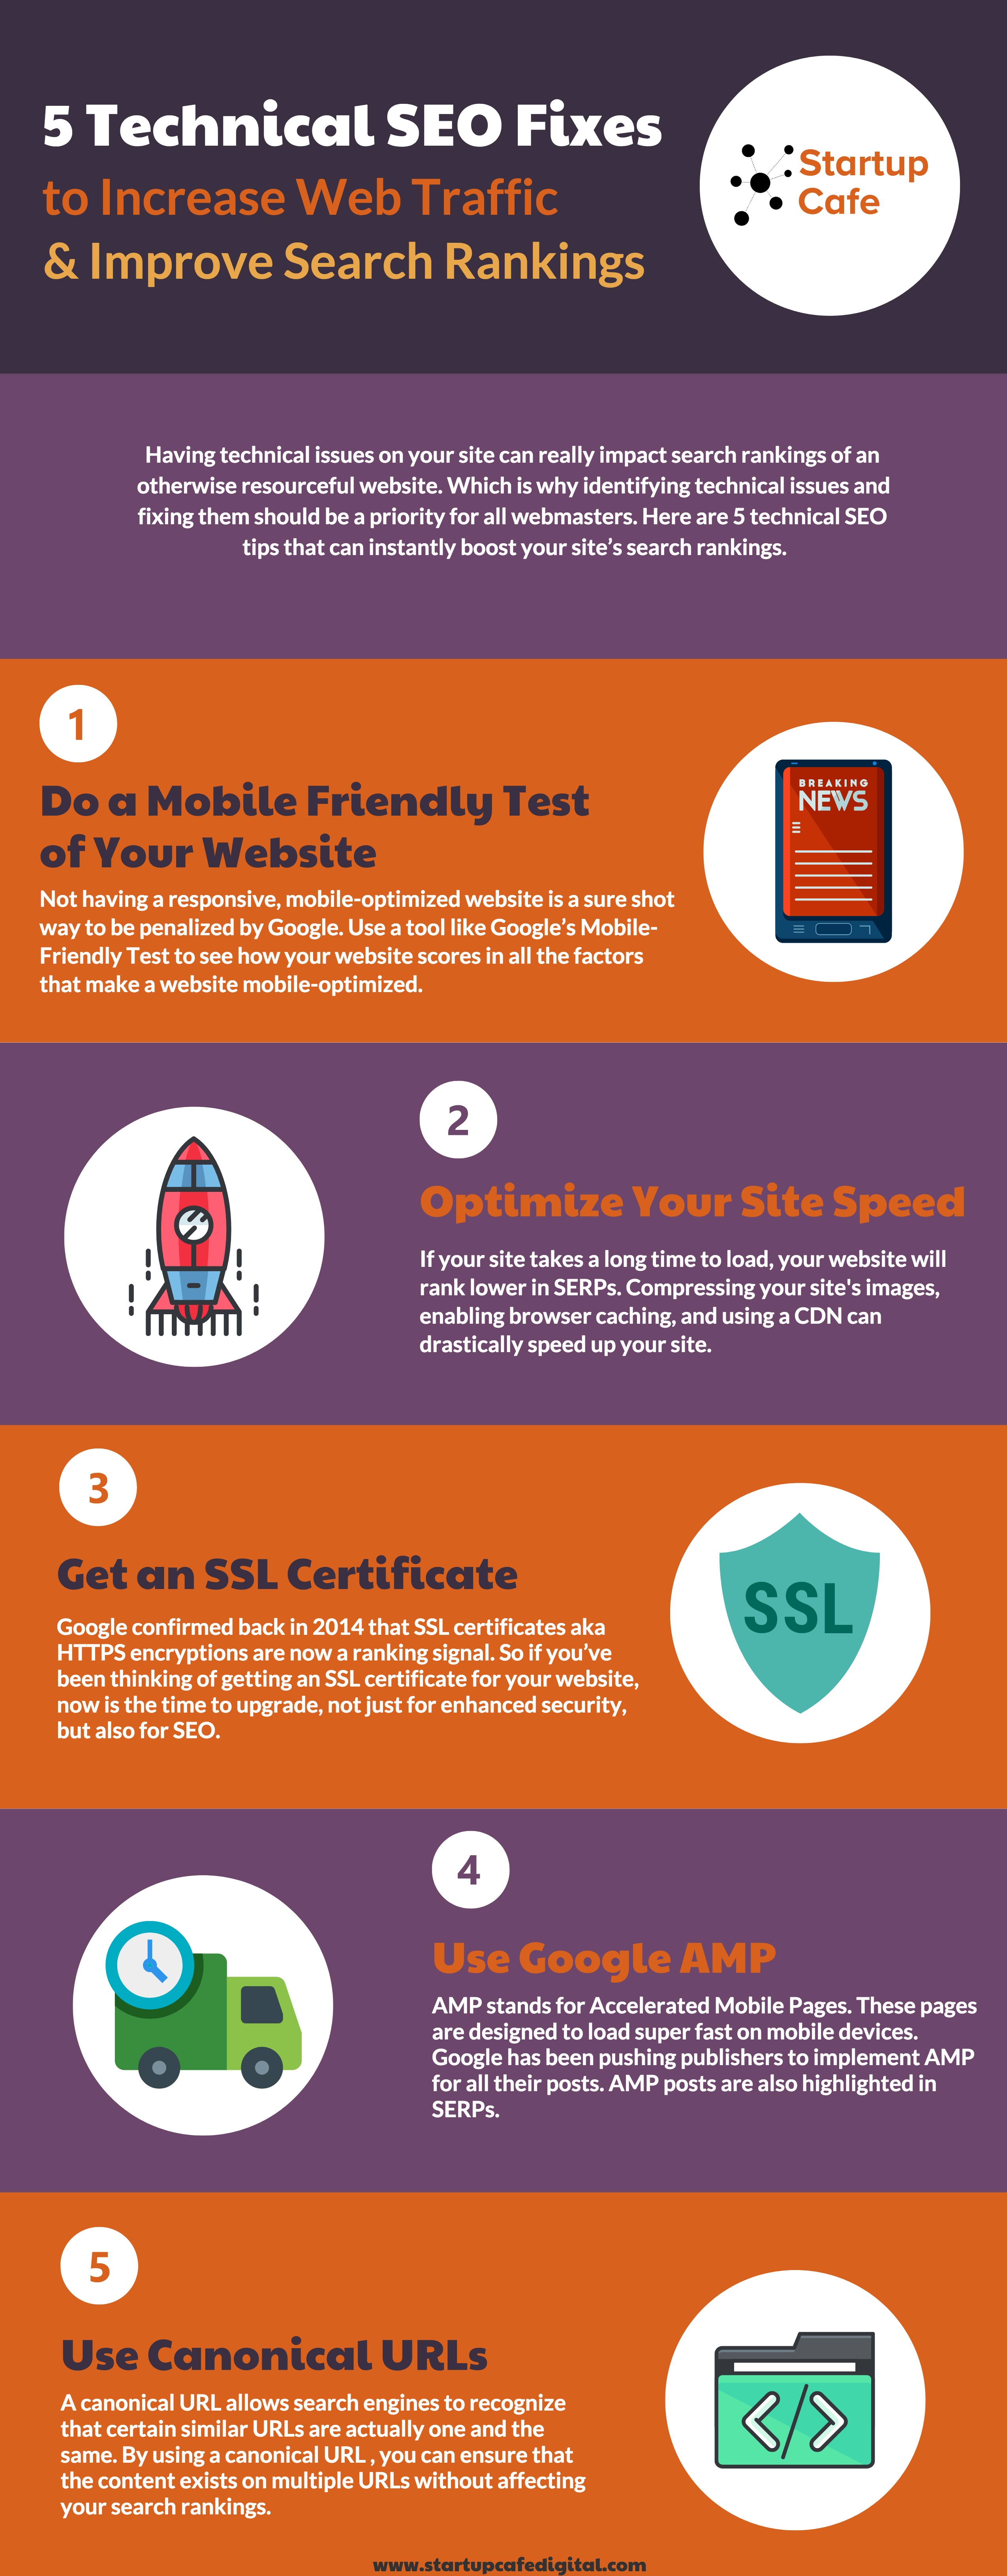 5 Technical SEO Fixes: Infographic